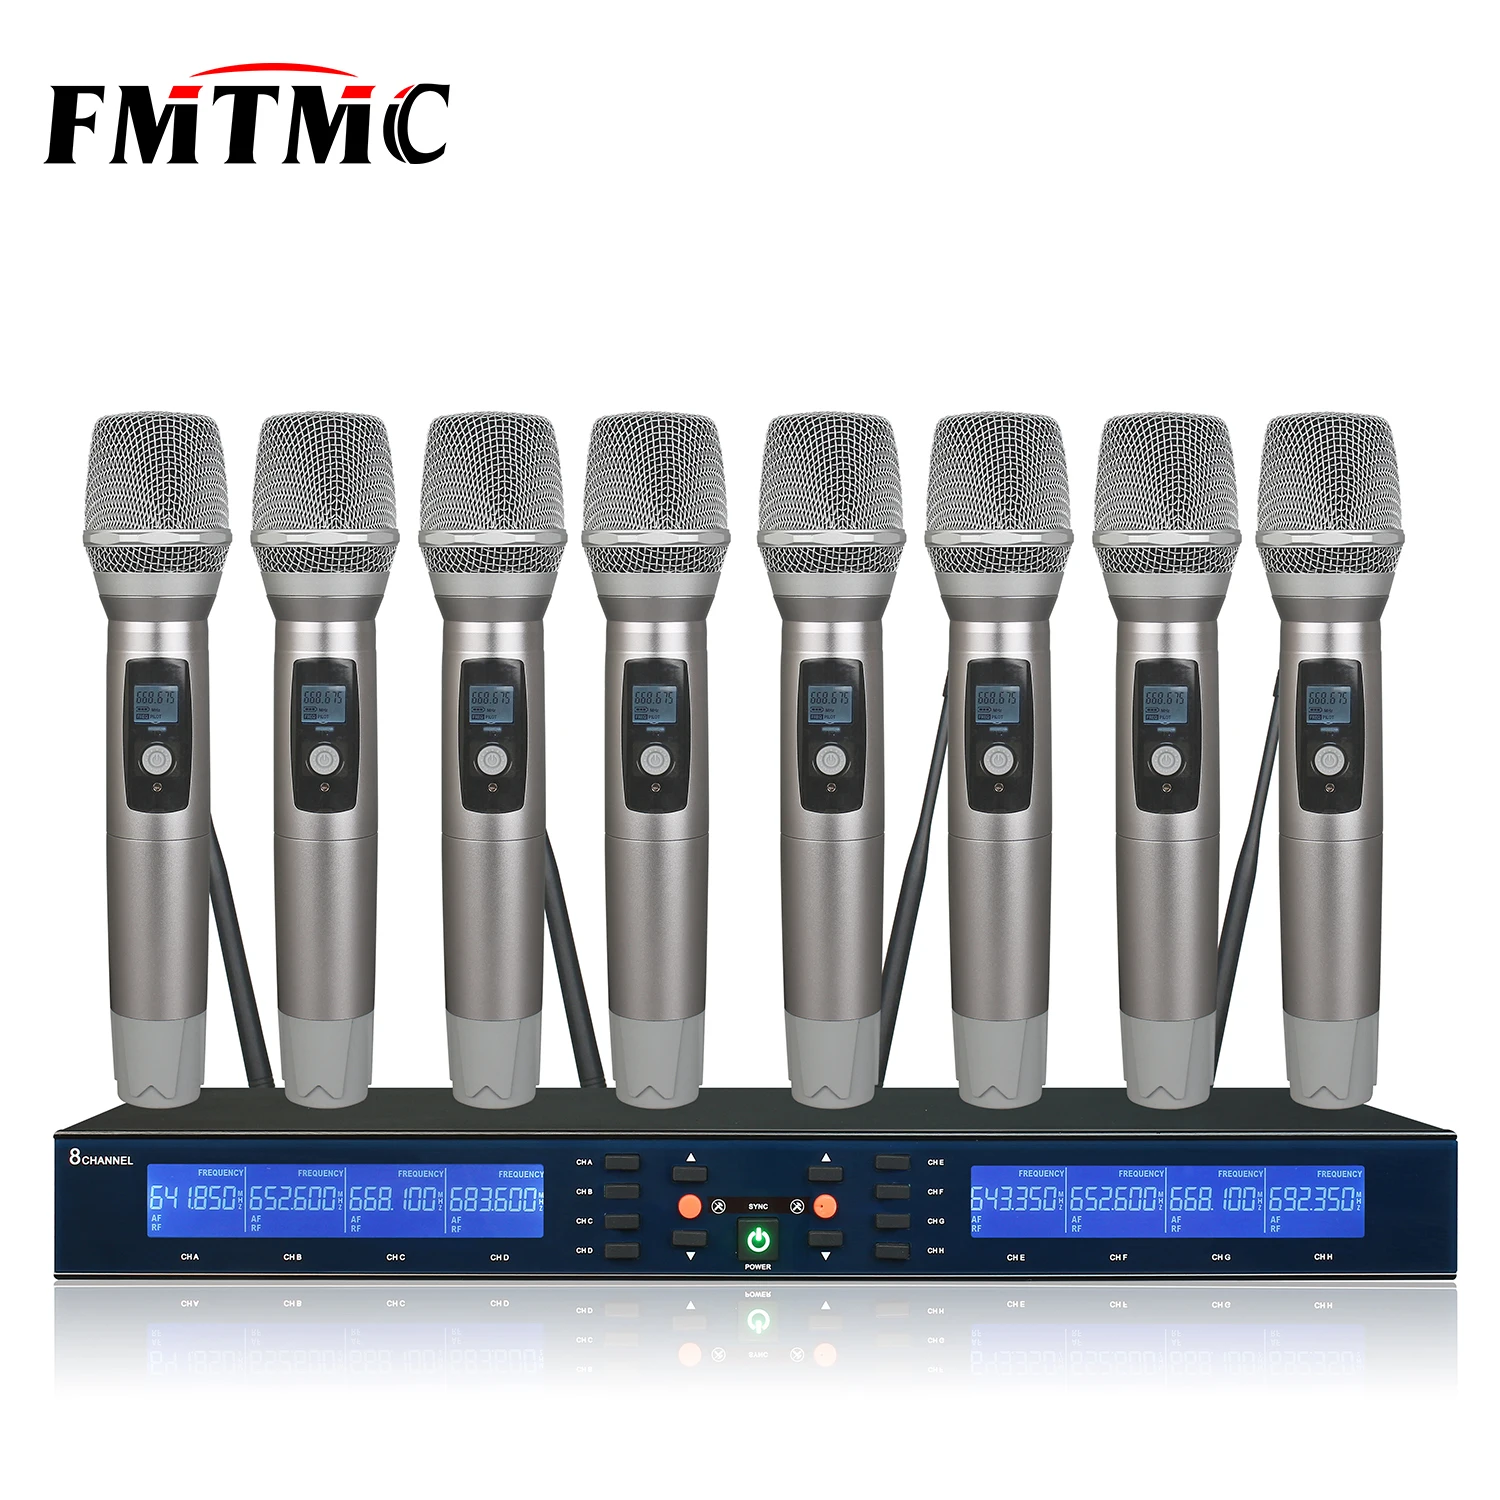 

Good Quality U-M8100 Handheld Professional 8 Channels UHF Wireless Microphone for Conference Speech Teaching Party Church